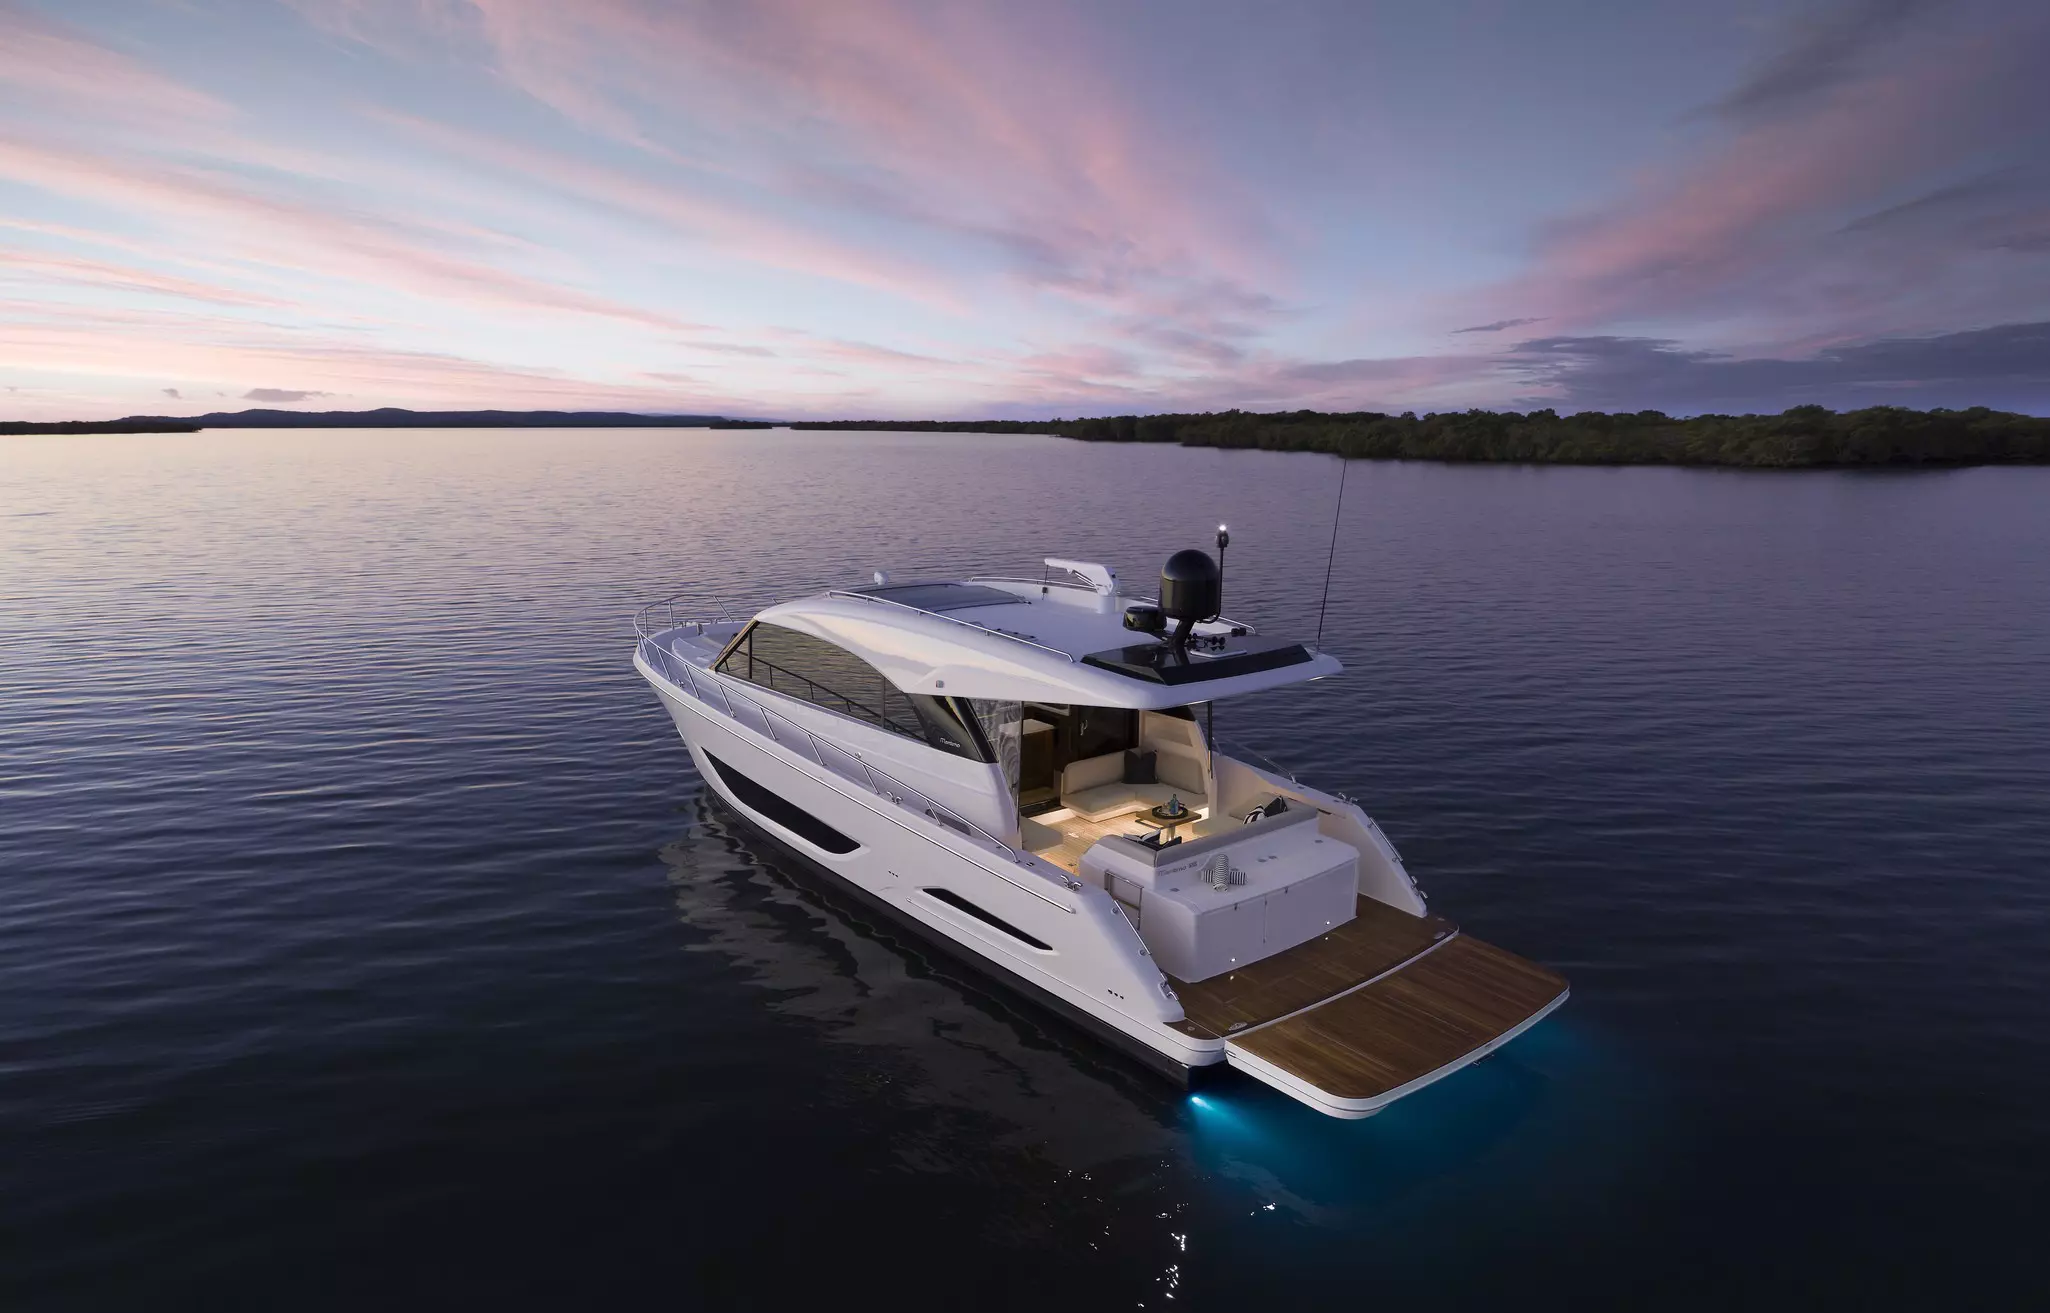 Maritimo S55 with YachtSense™ System onboard